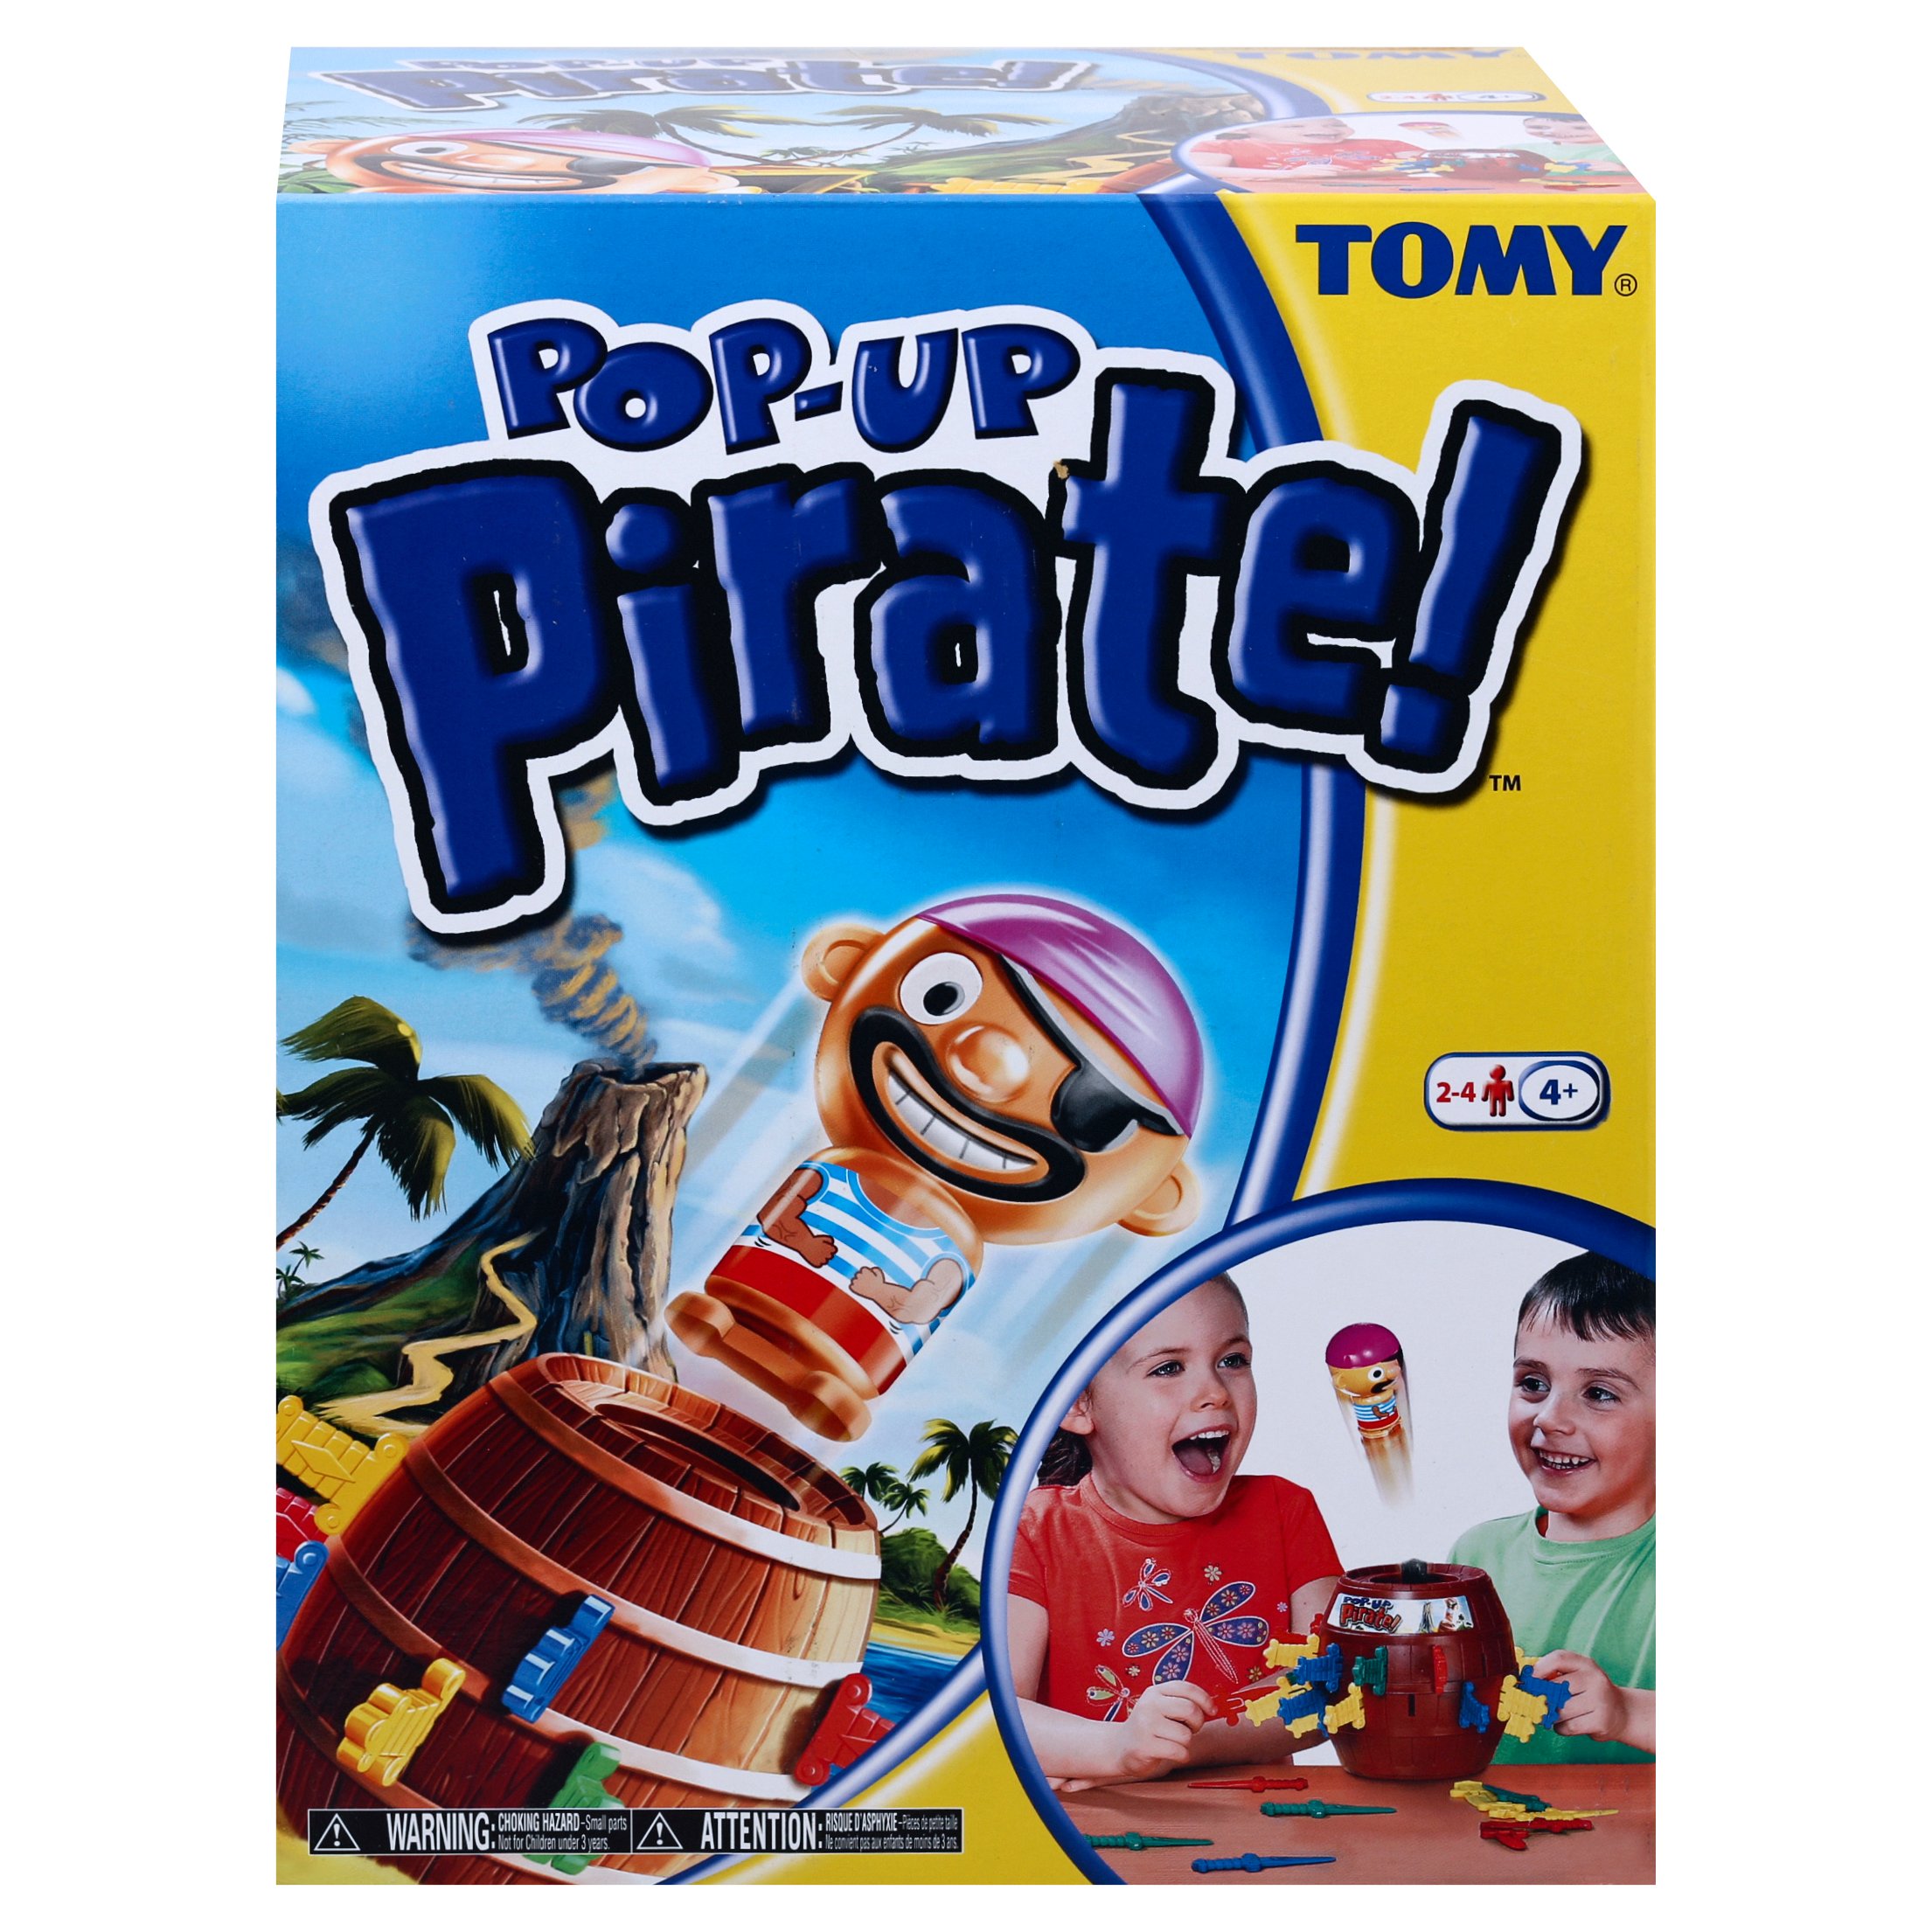 Tomy Pop Up Pirate Spare Replacement Pirate Figure 